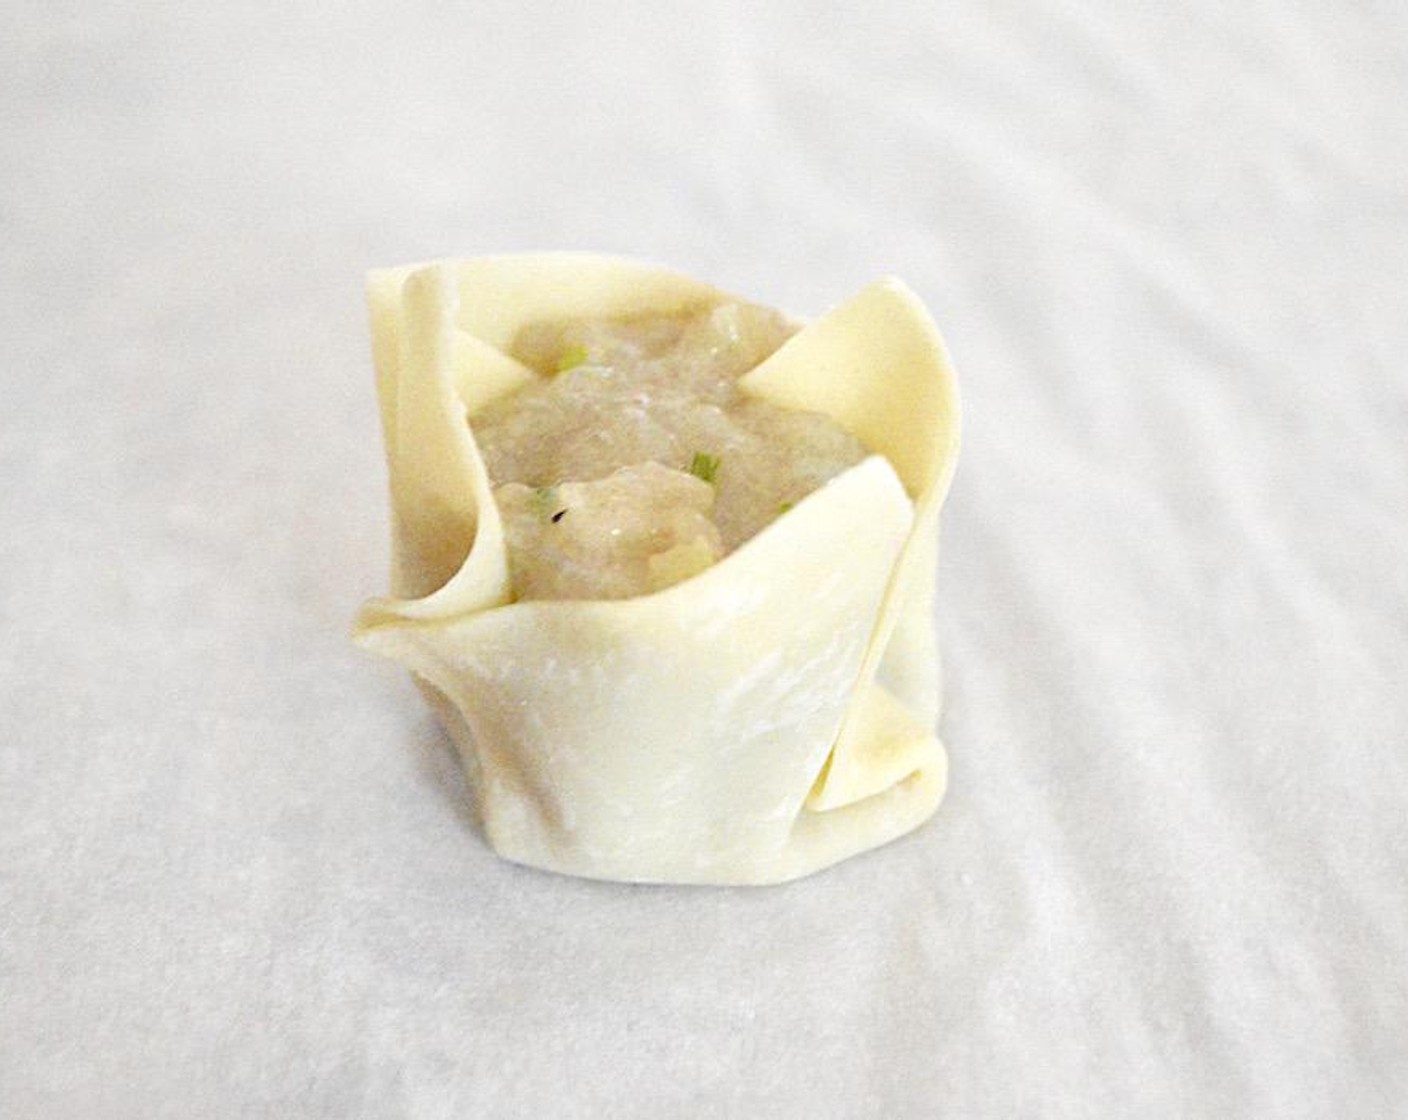 step 2 Dollop 2 teaspoons of that filling into the center of each of the Wonton Wrappers (24), then bring up the sides and pleat them to look like a little drawstring purse. The filling should peek out a little. Place under a clean, wet cotton towel to keep the wrappers from drying out.